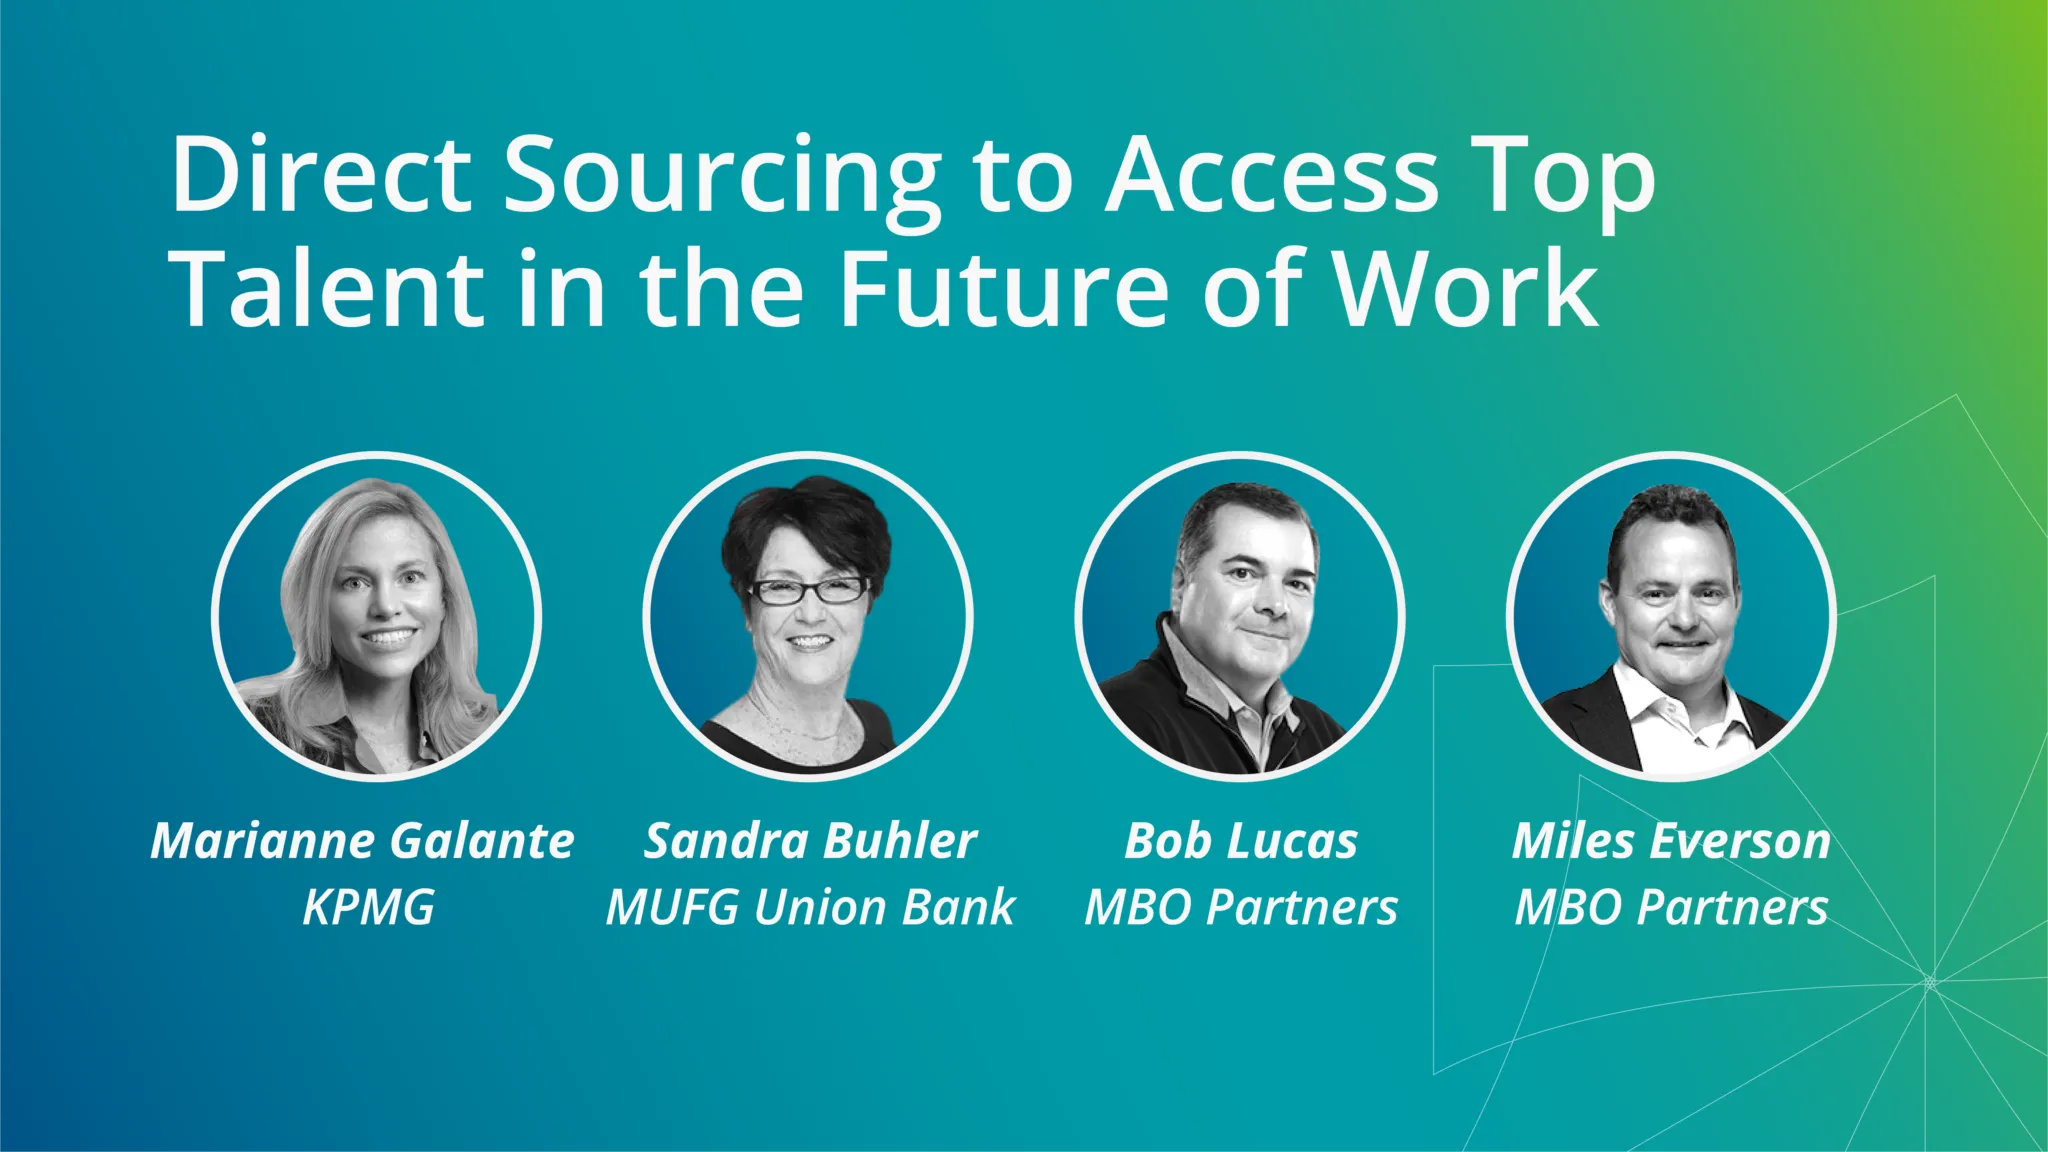 Direct-Sourcing-to-Access-Top-Talent-in-the-Future-of-Work-2048x1152.png.webp